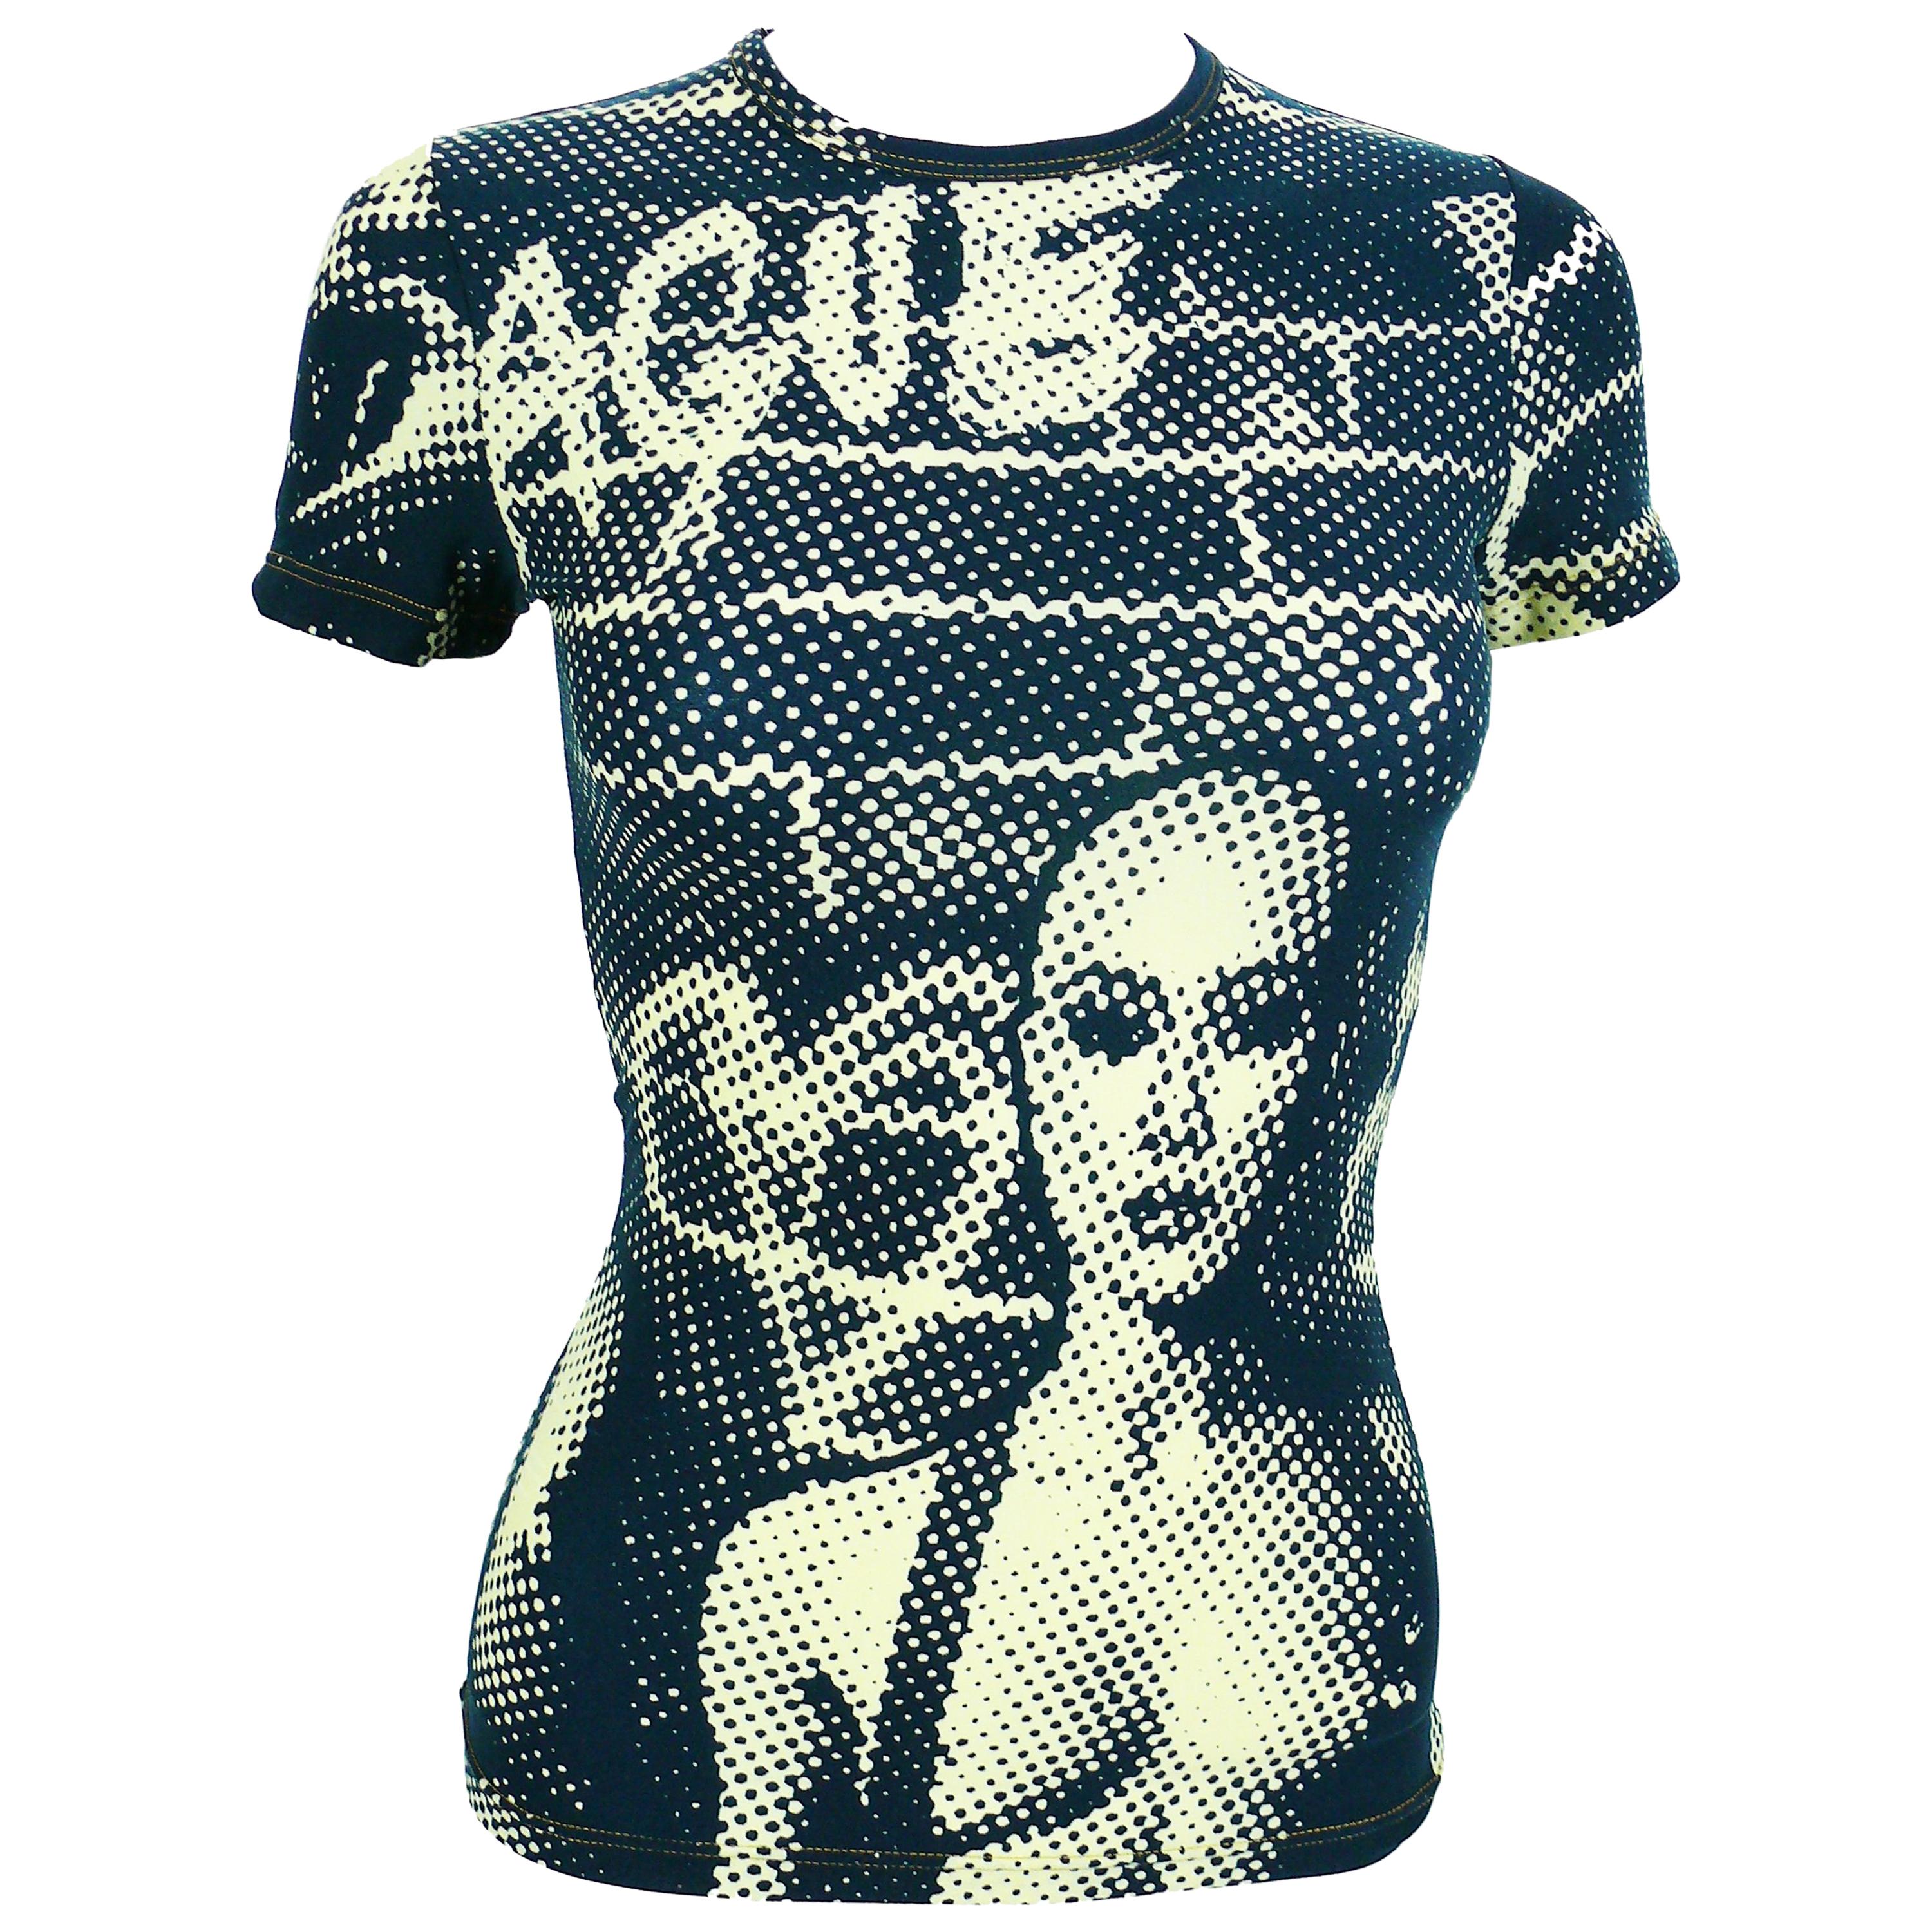 Jean Paul Gaultier Vintage Fight Racism Collection Shirt